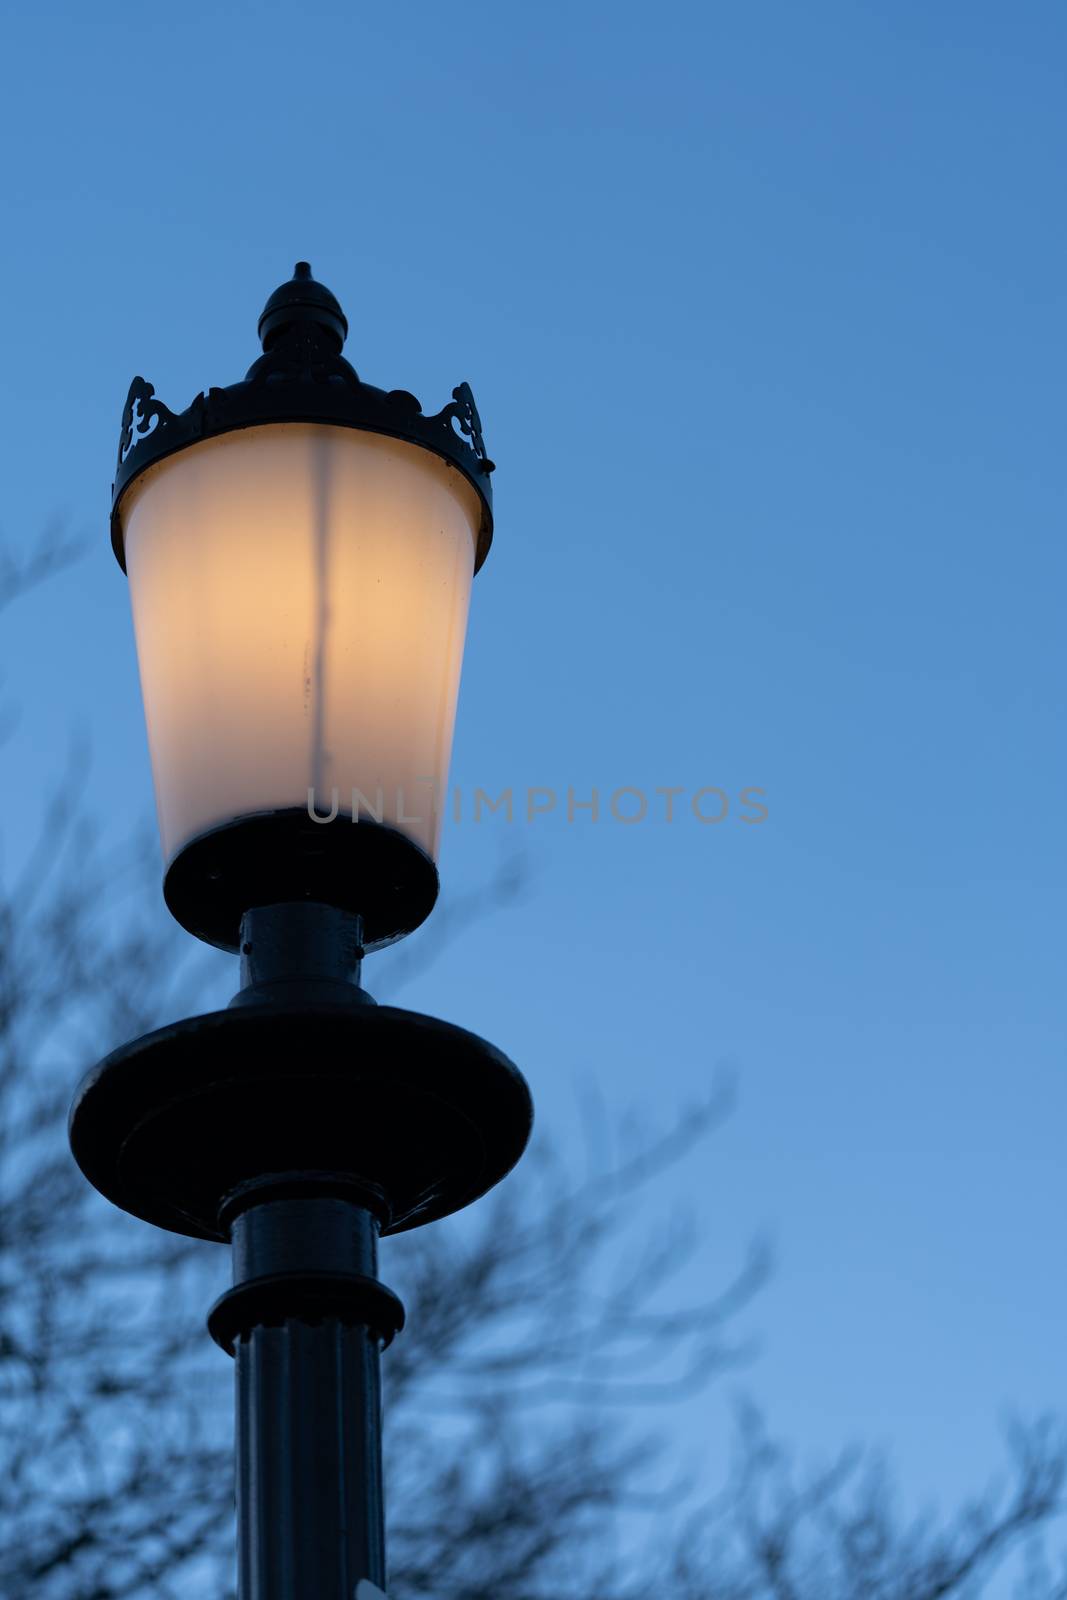 An old fashioned street light in England UK